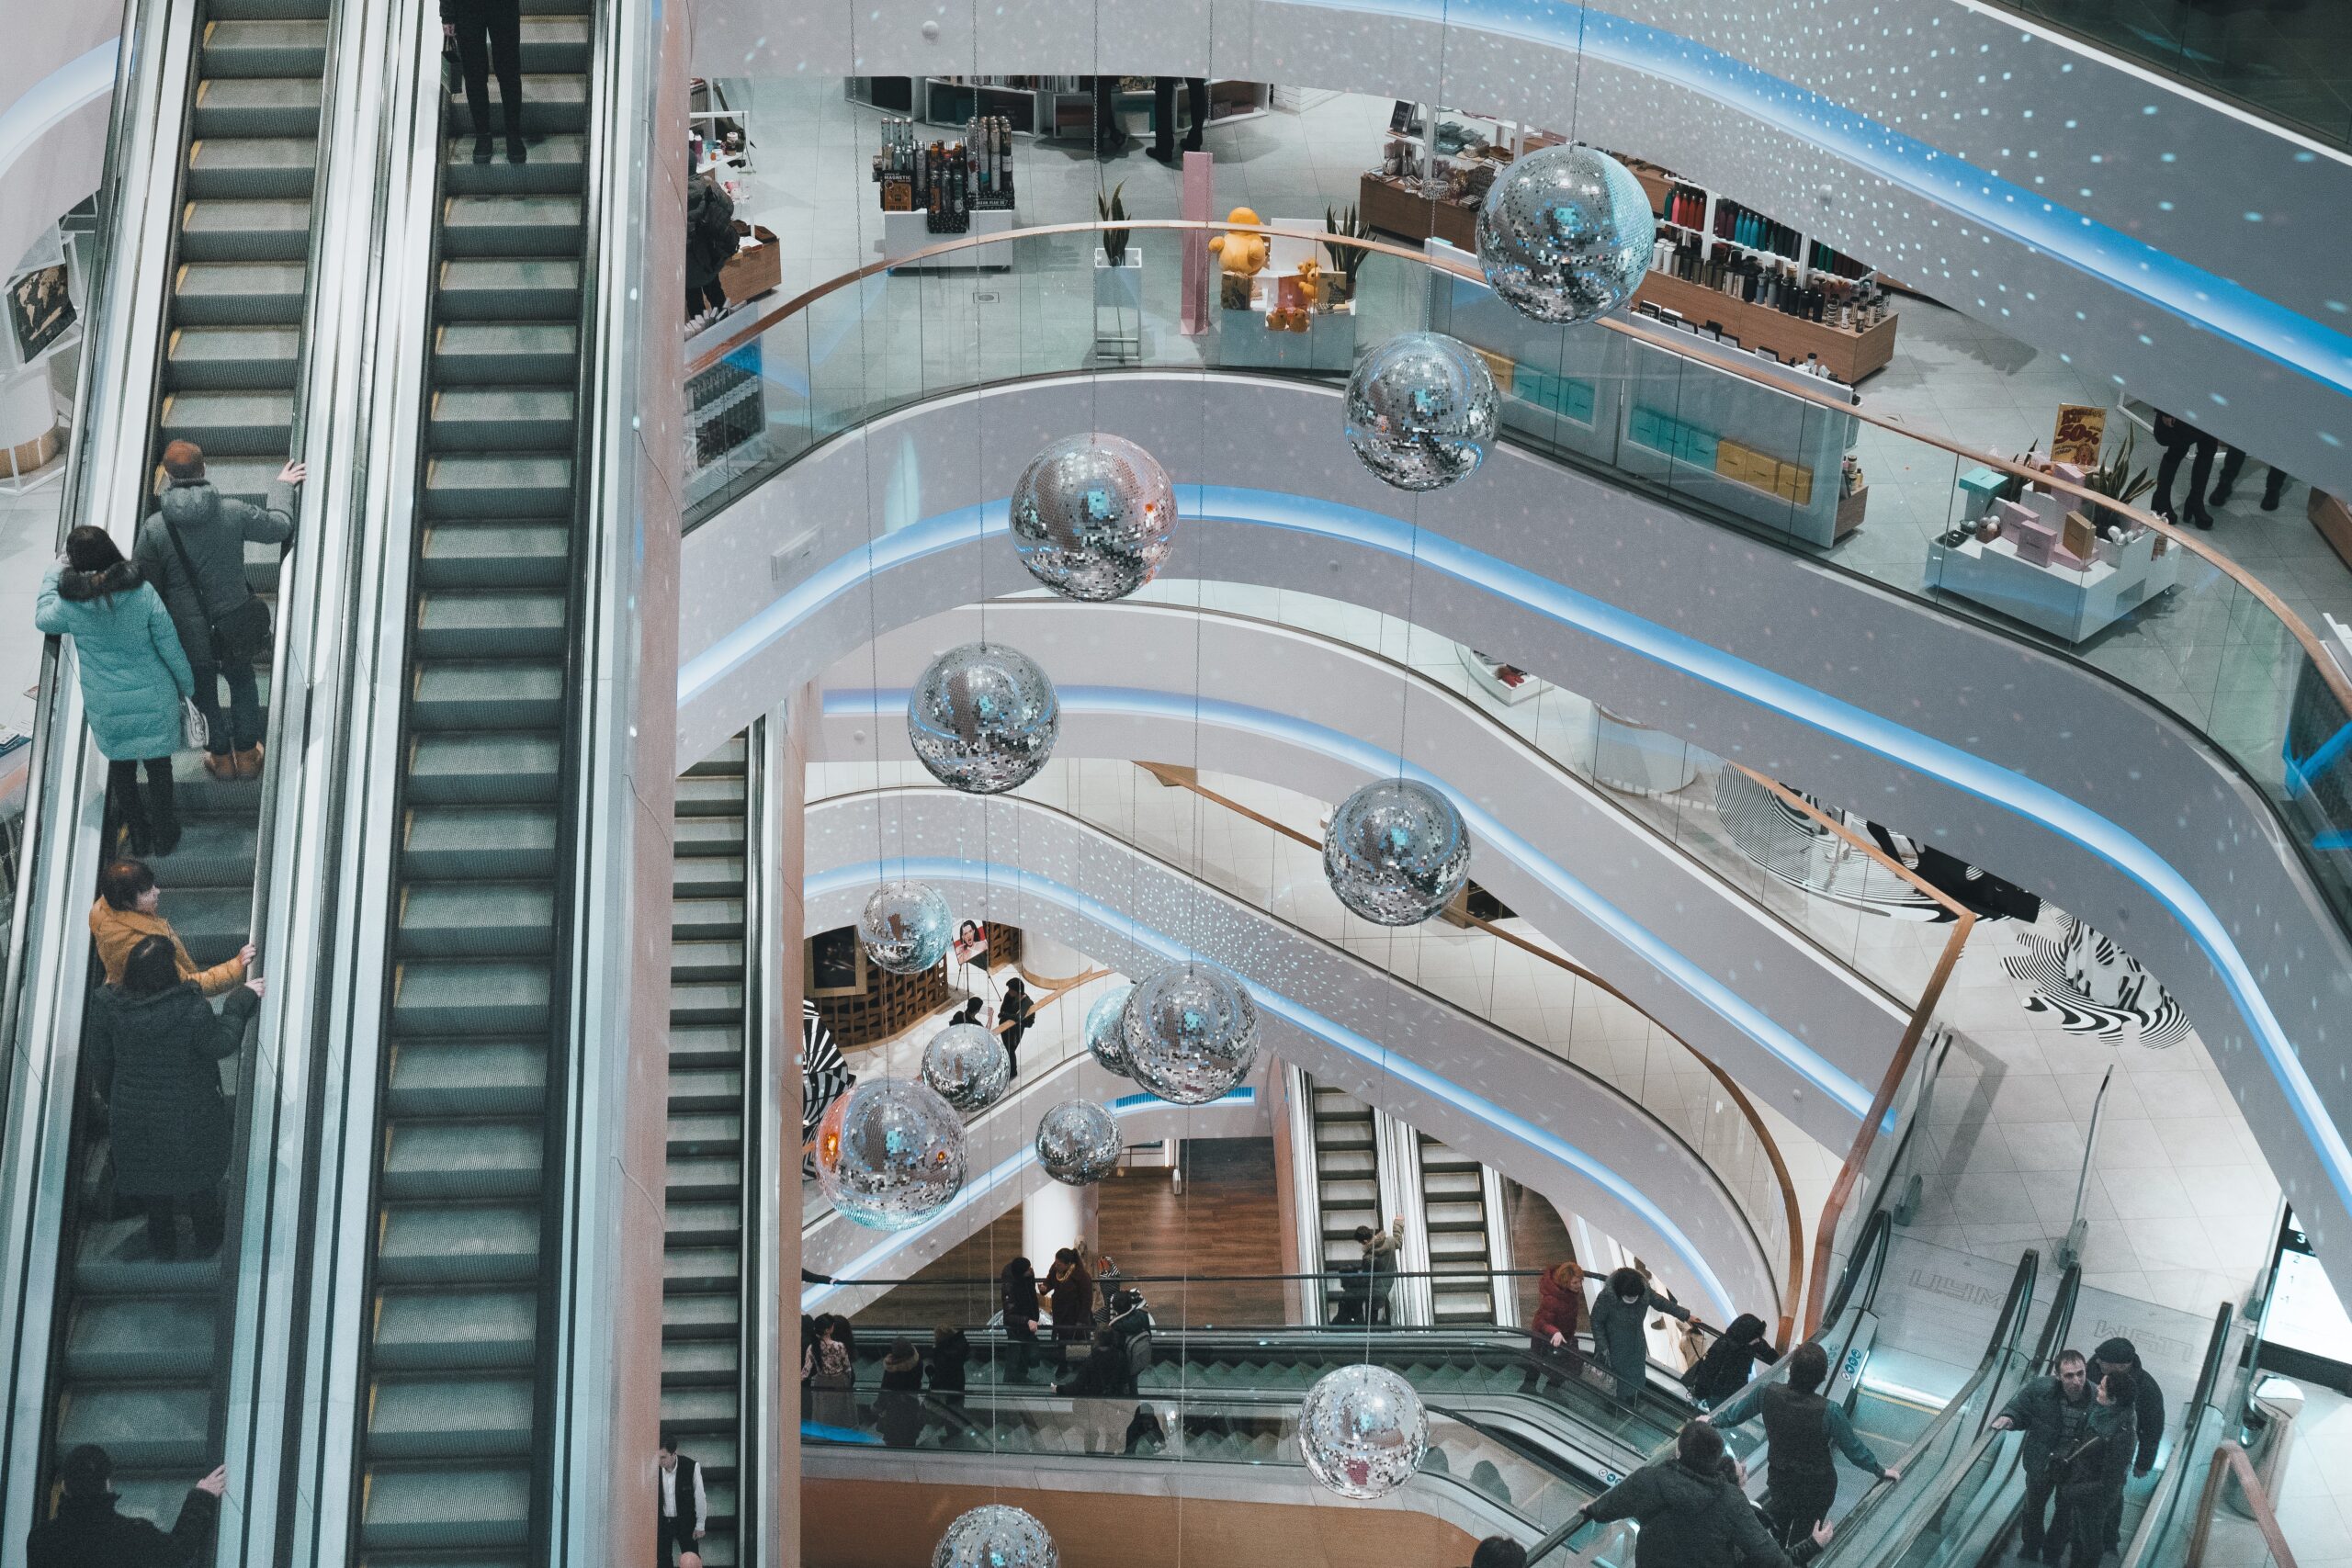 overhead view of escalators in shopping mall.